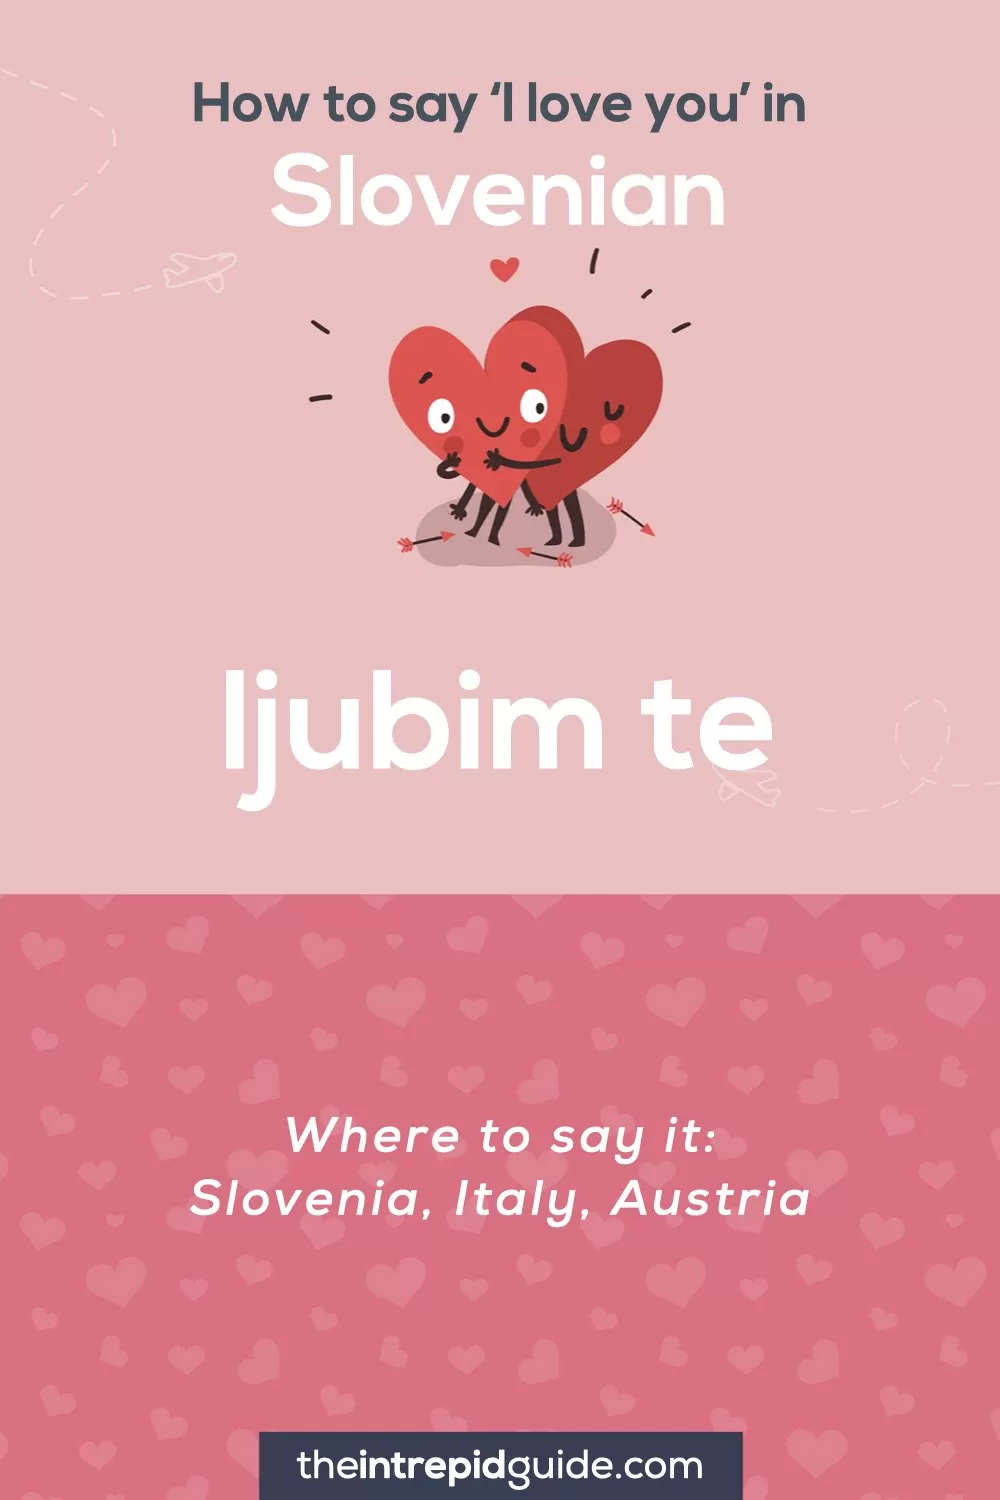 How to say I love you in different languages - Slovenian - ljubim te